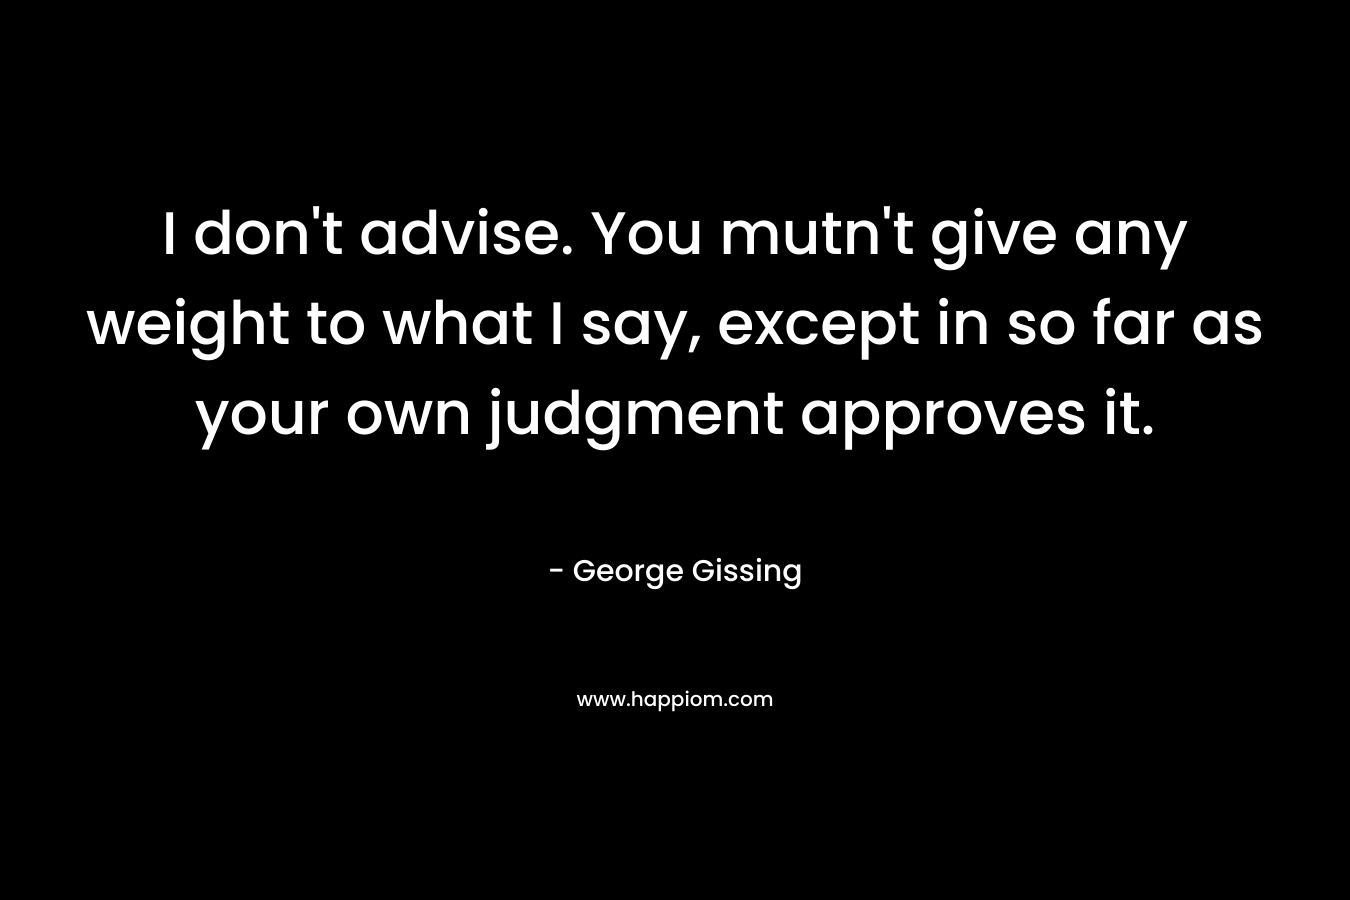 I don’t advise. You mutn’t give any weight to what I say, except in so far as your own judgment approves it. – George Gissing